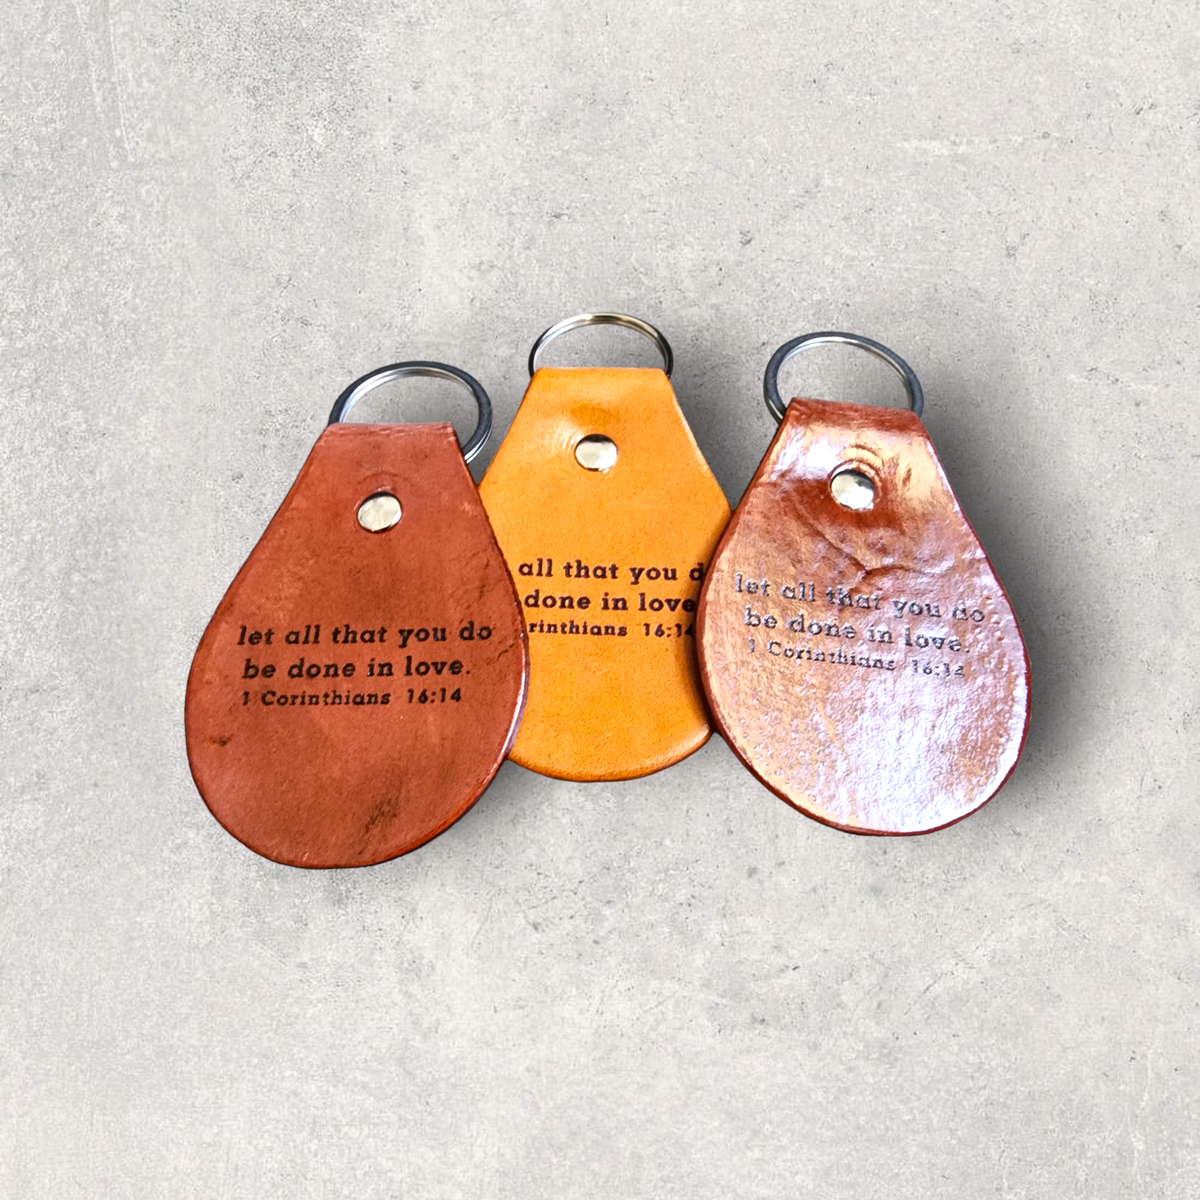 Engraved Leather Keychain - let all that you do be done in love